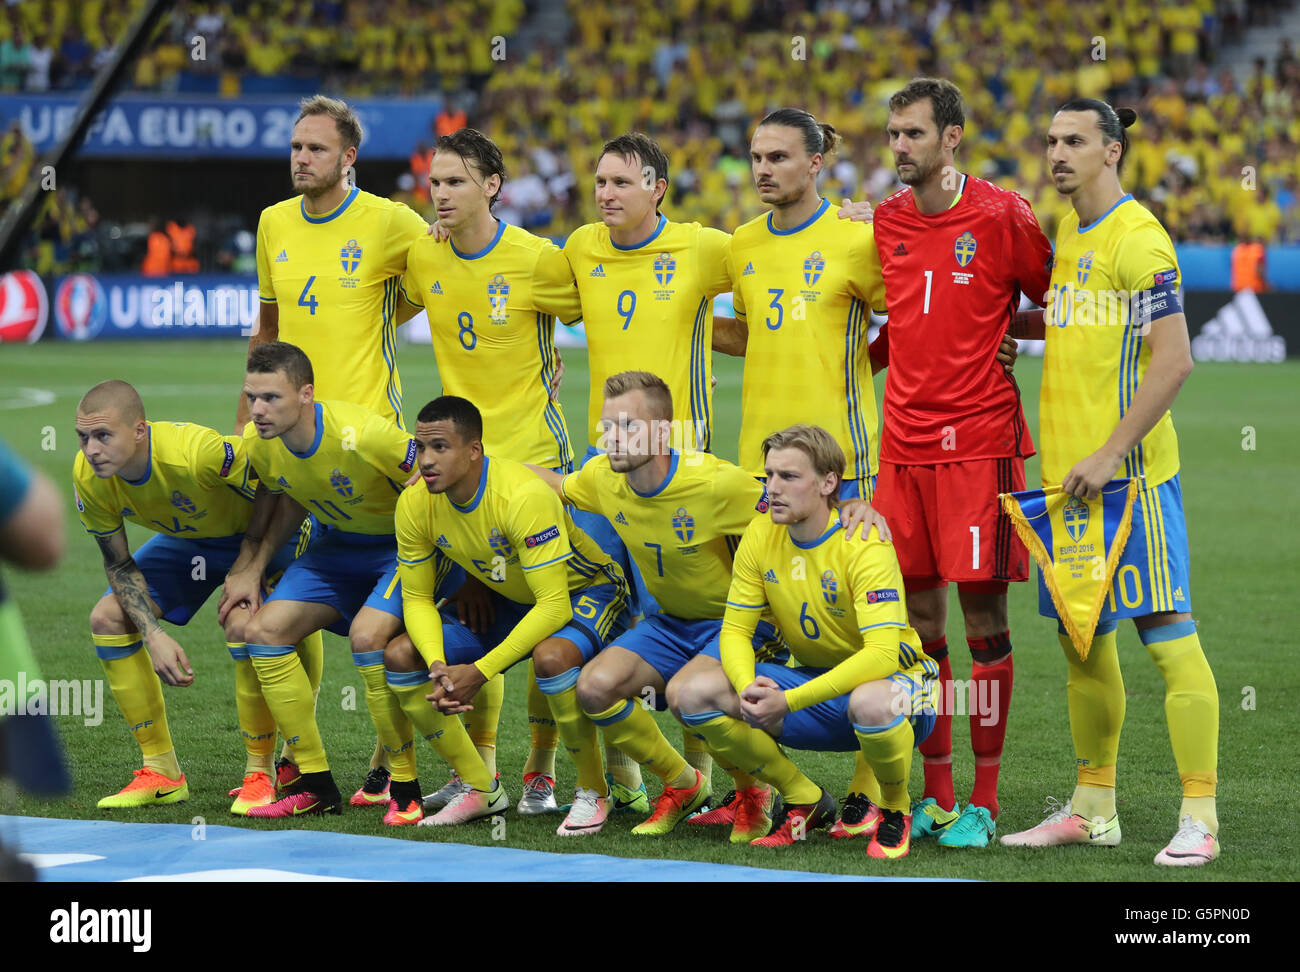 Nice, France. 22nd June, 2016. Players of Sweden national football team pose for a group photo before UEFA EURO 2016 game against Belgium at Allianz Riviera Stade de Nice, Nice, France. Credit:  Oleksandr Prykhodko/Alamy Live News Stock Photo